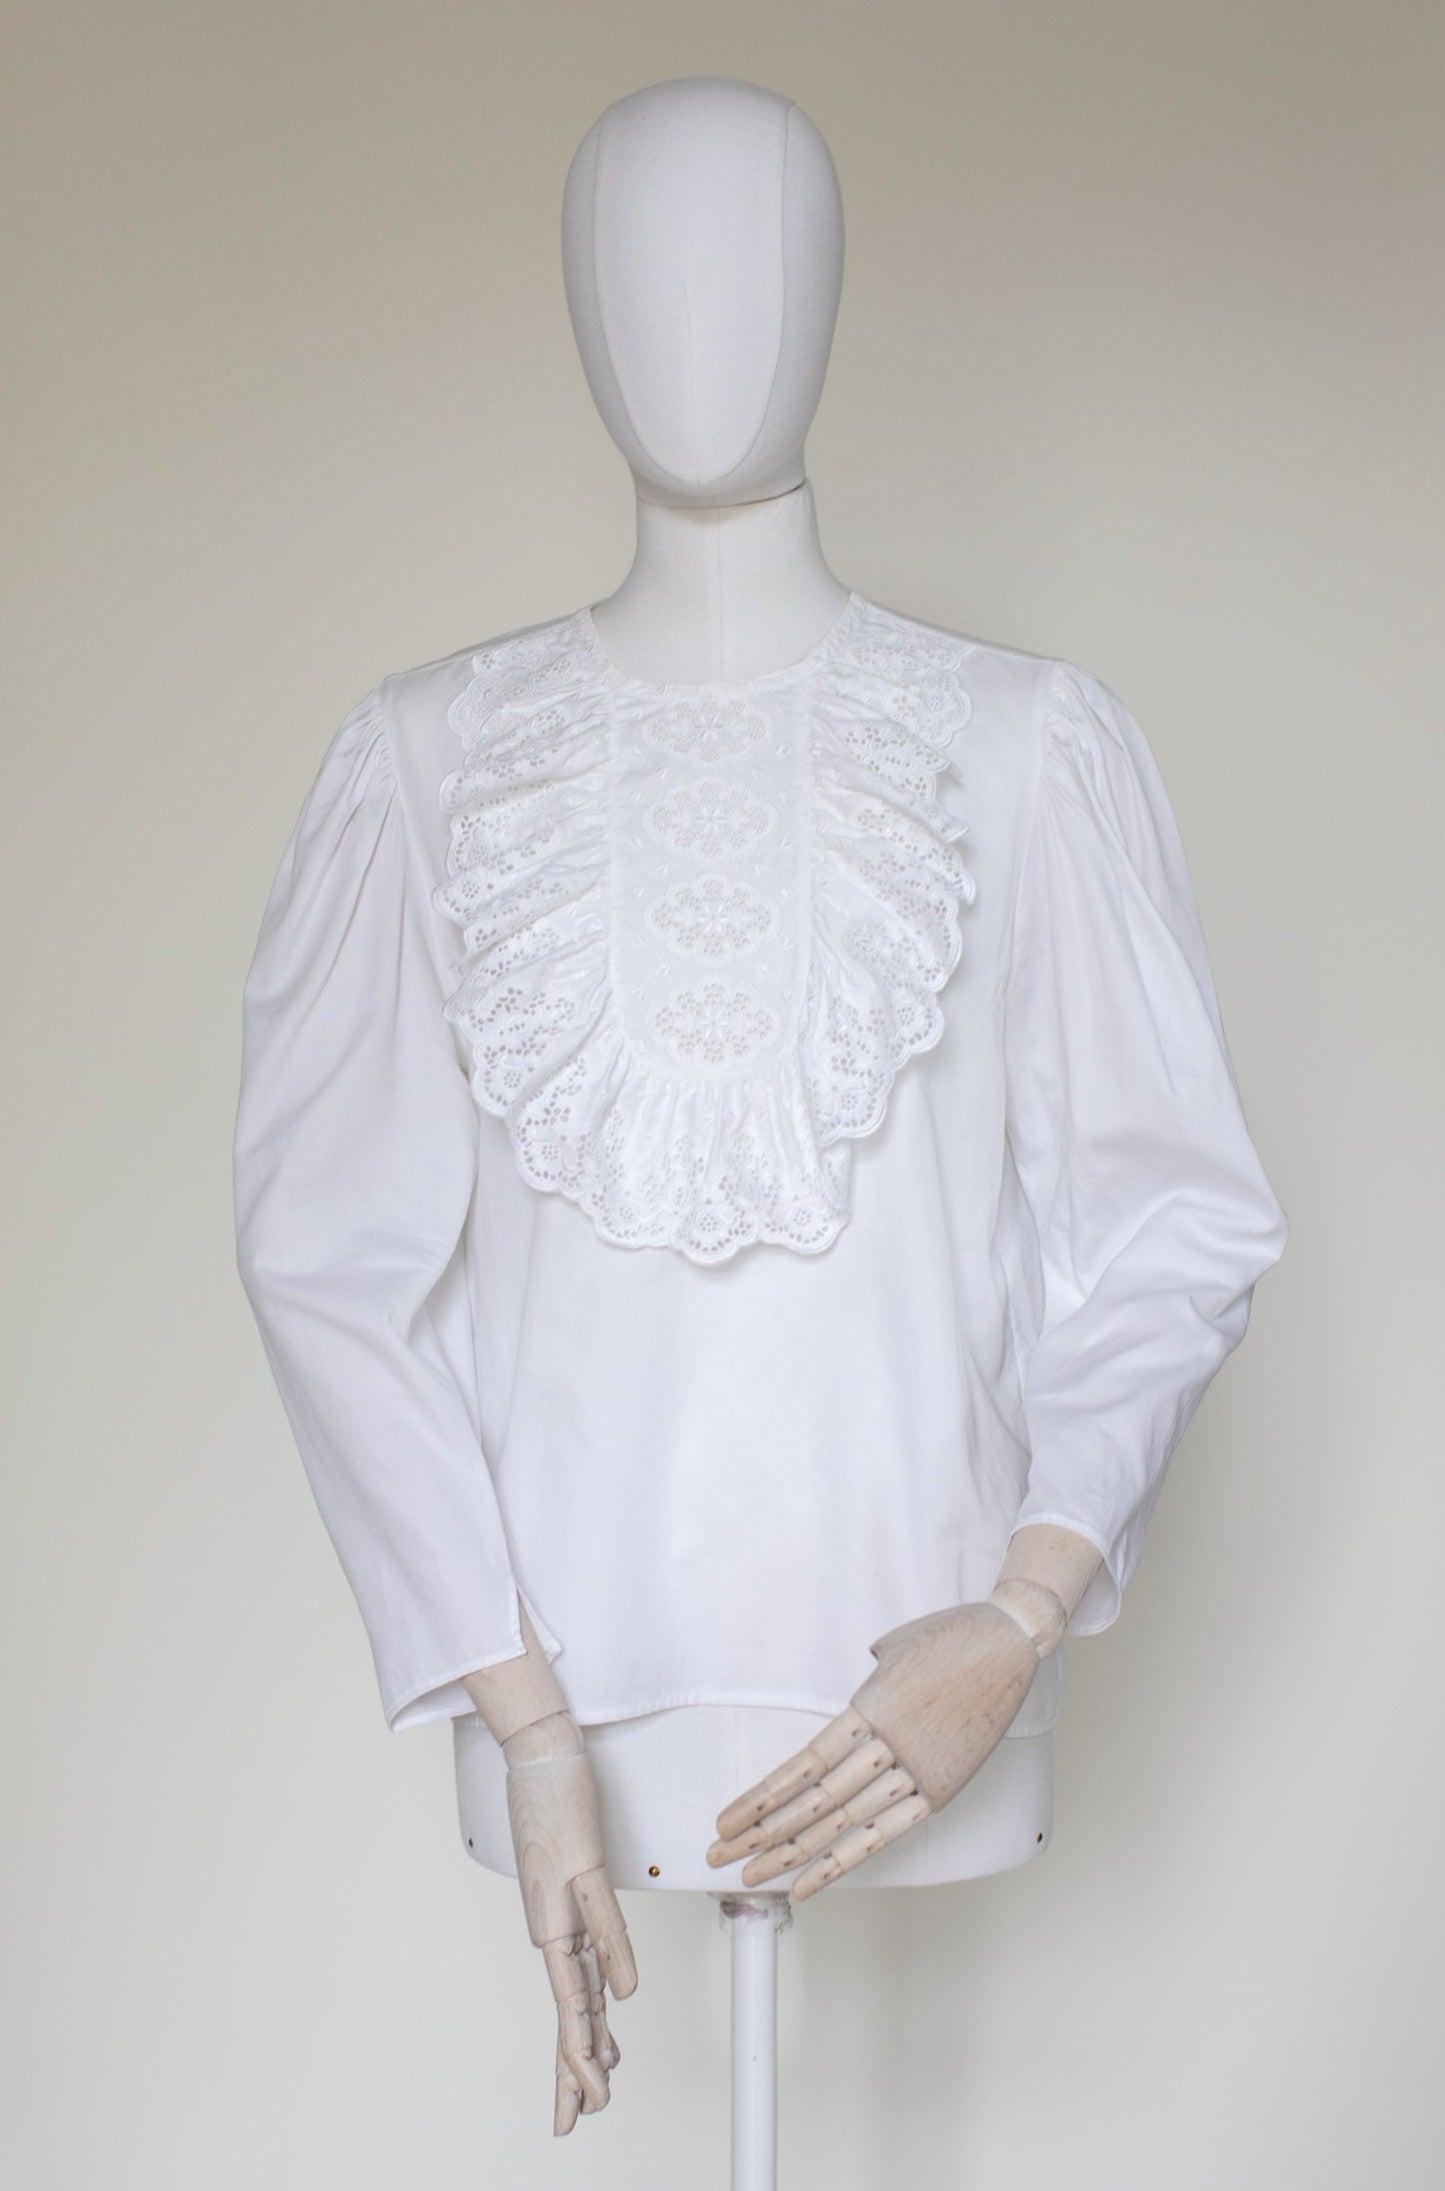 1980s Vintage Embroidered White Cotton Blouse Size XS-S